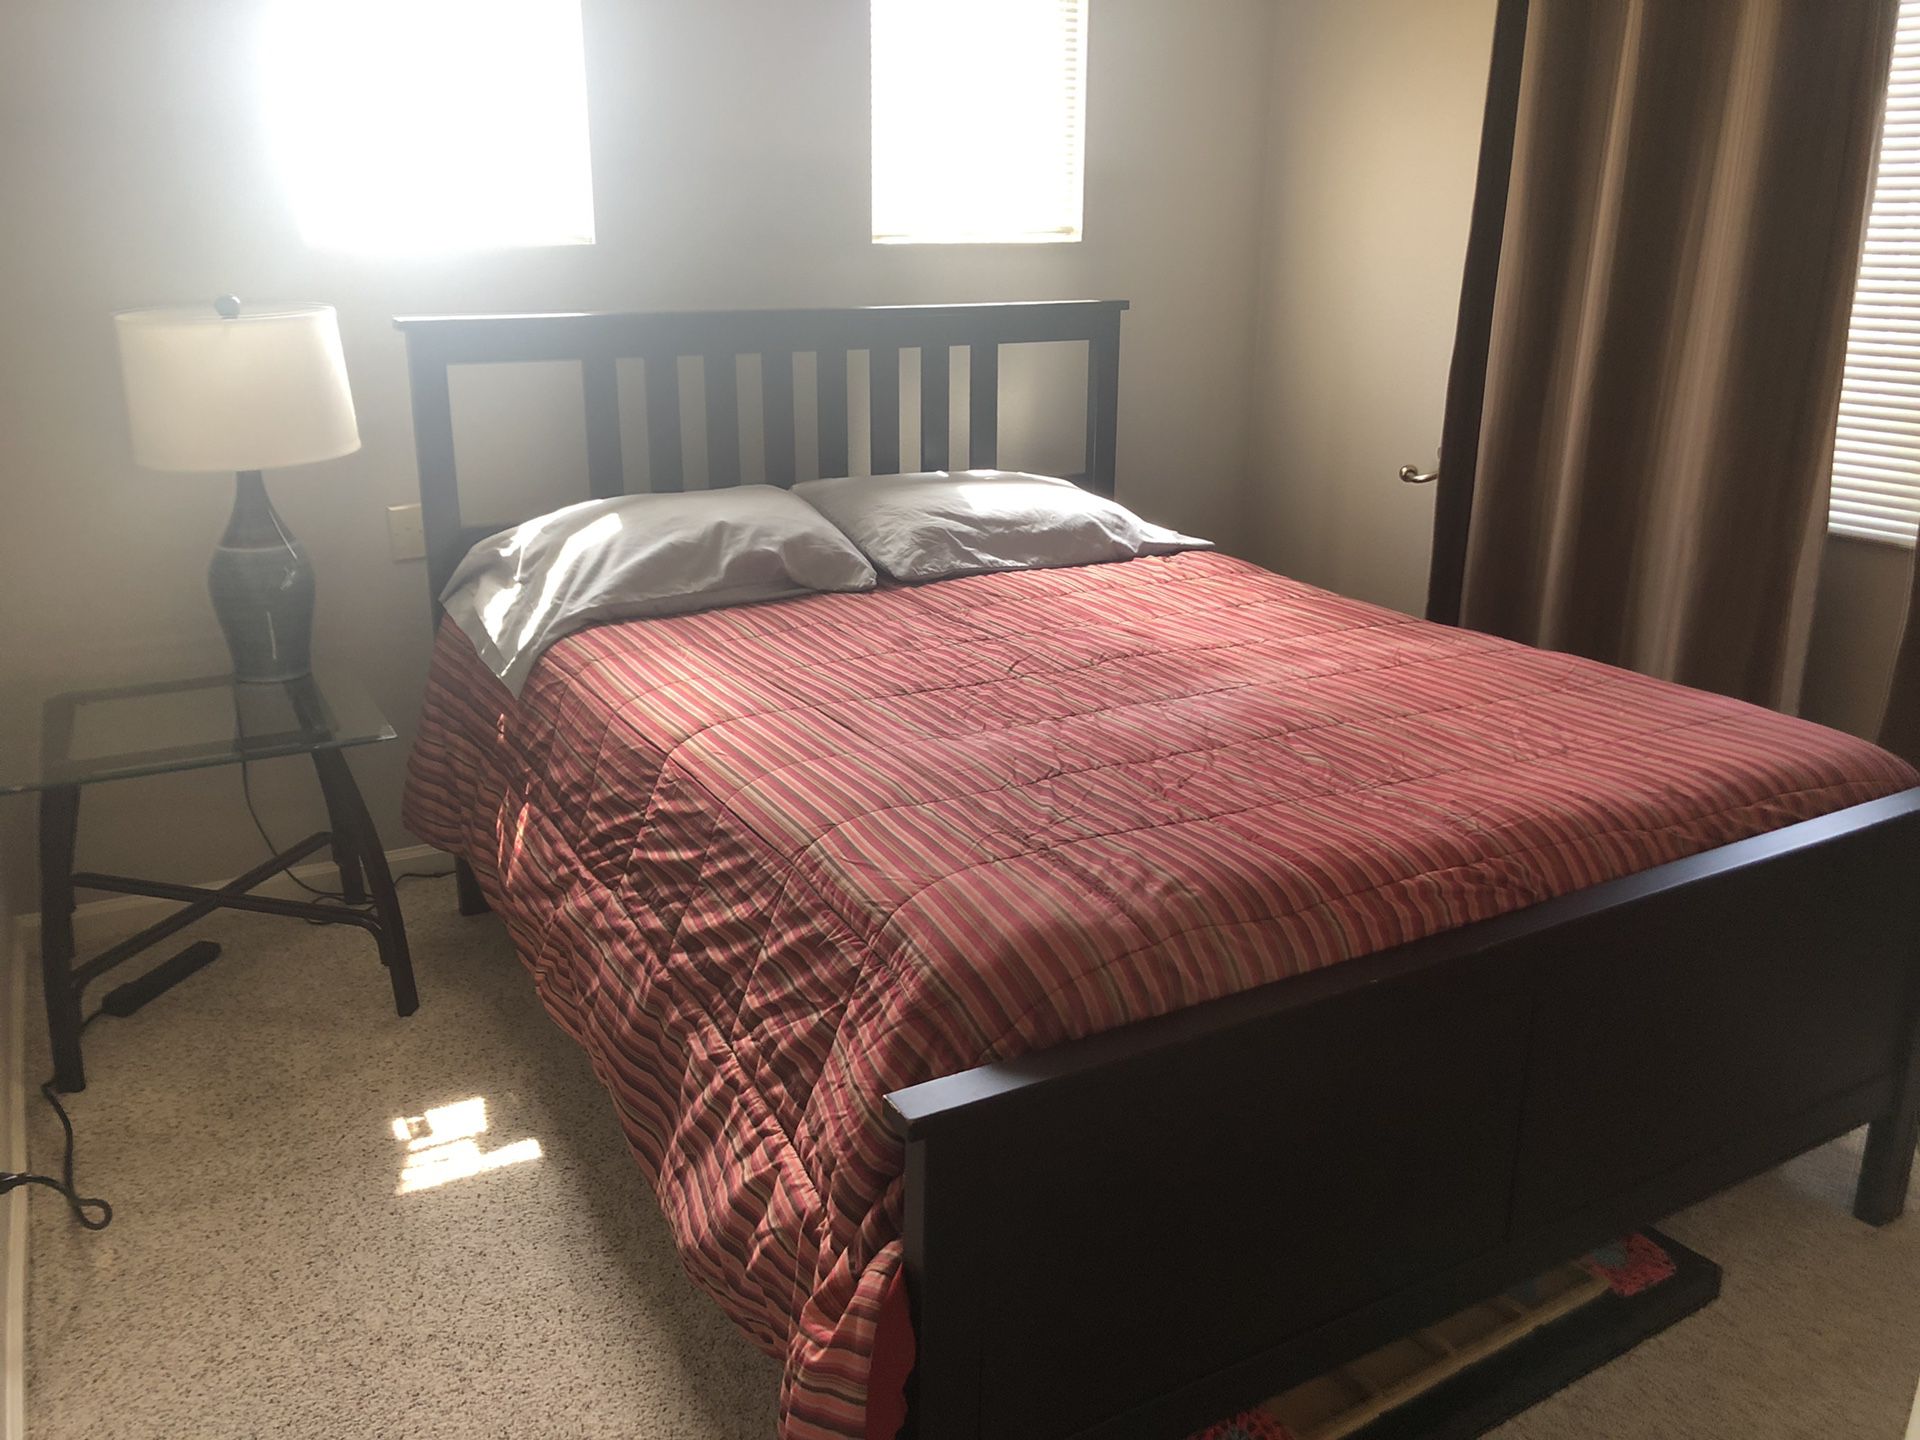 Queen bed frame, mattress and box spring